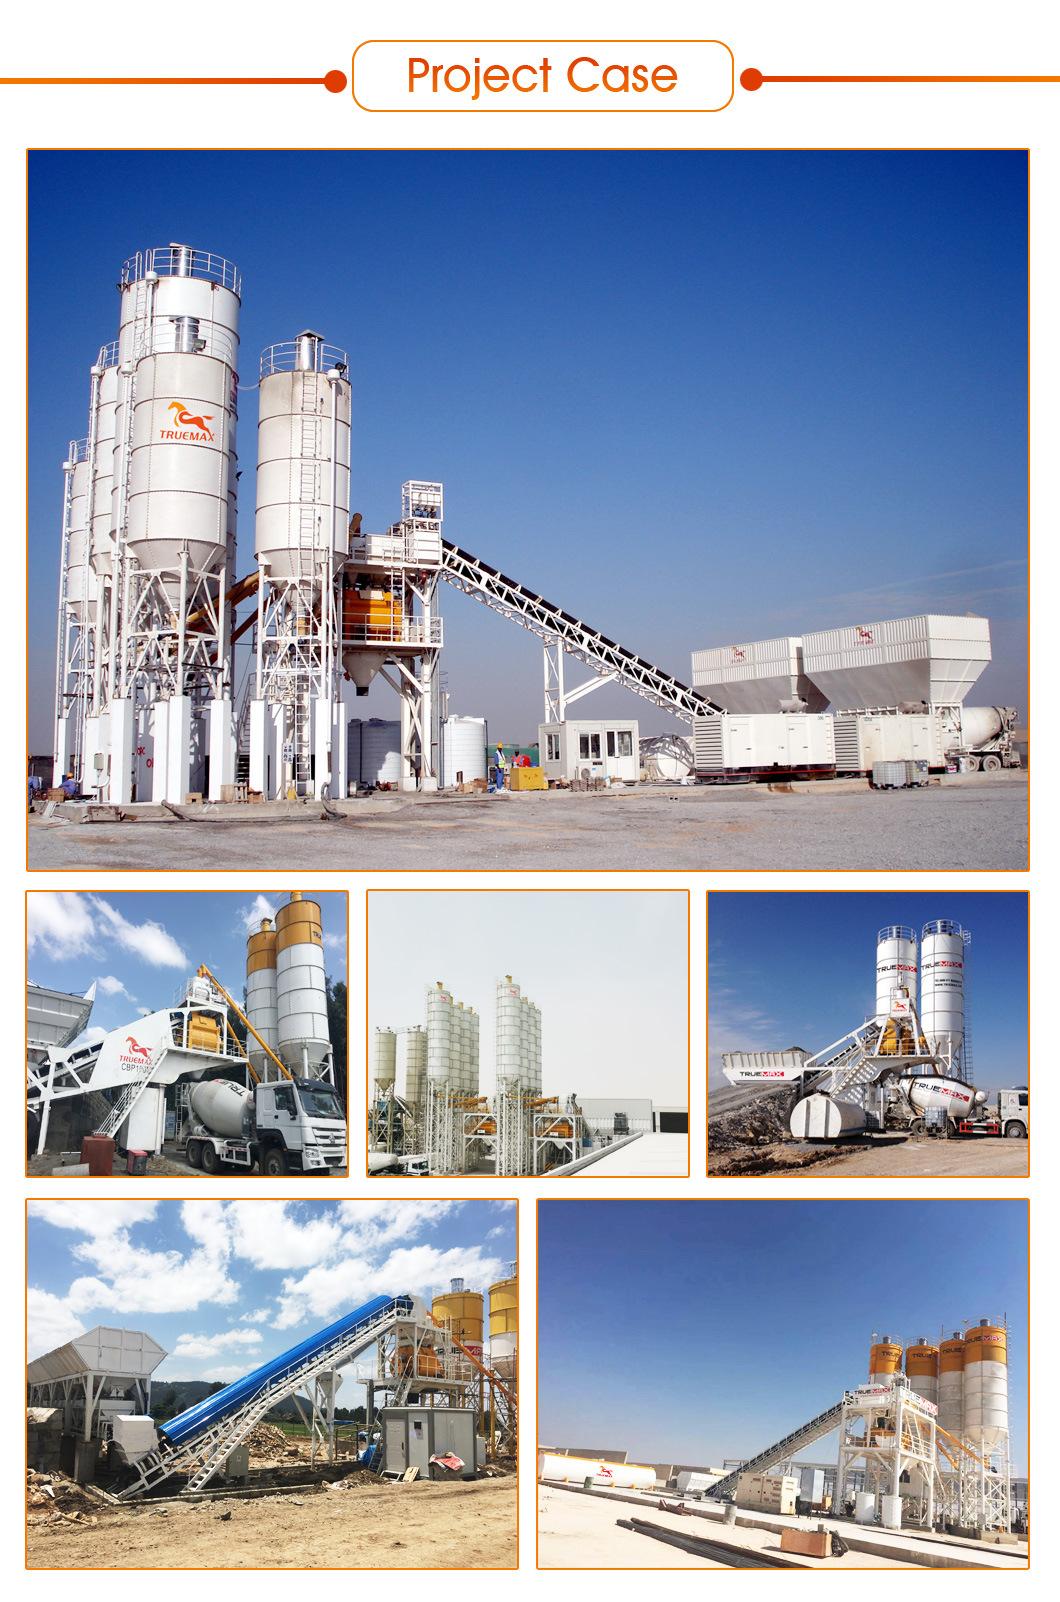 China Factory Concrete Batching Plant with Good Price